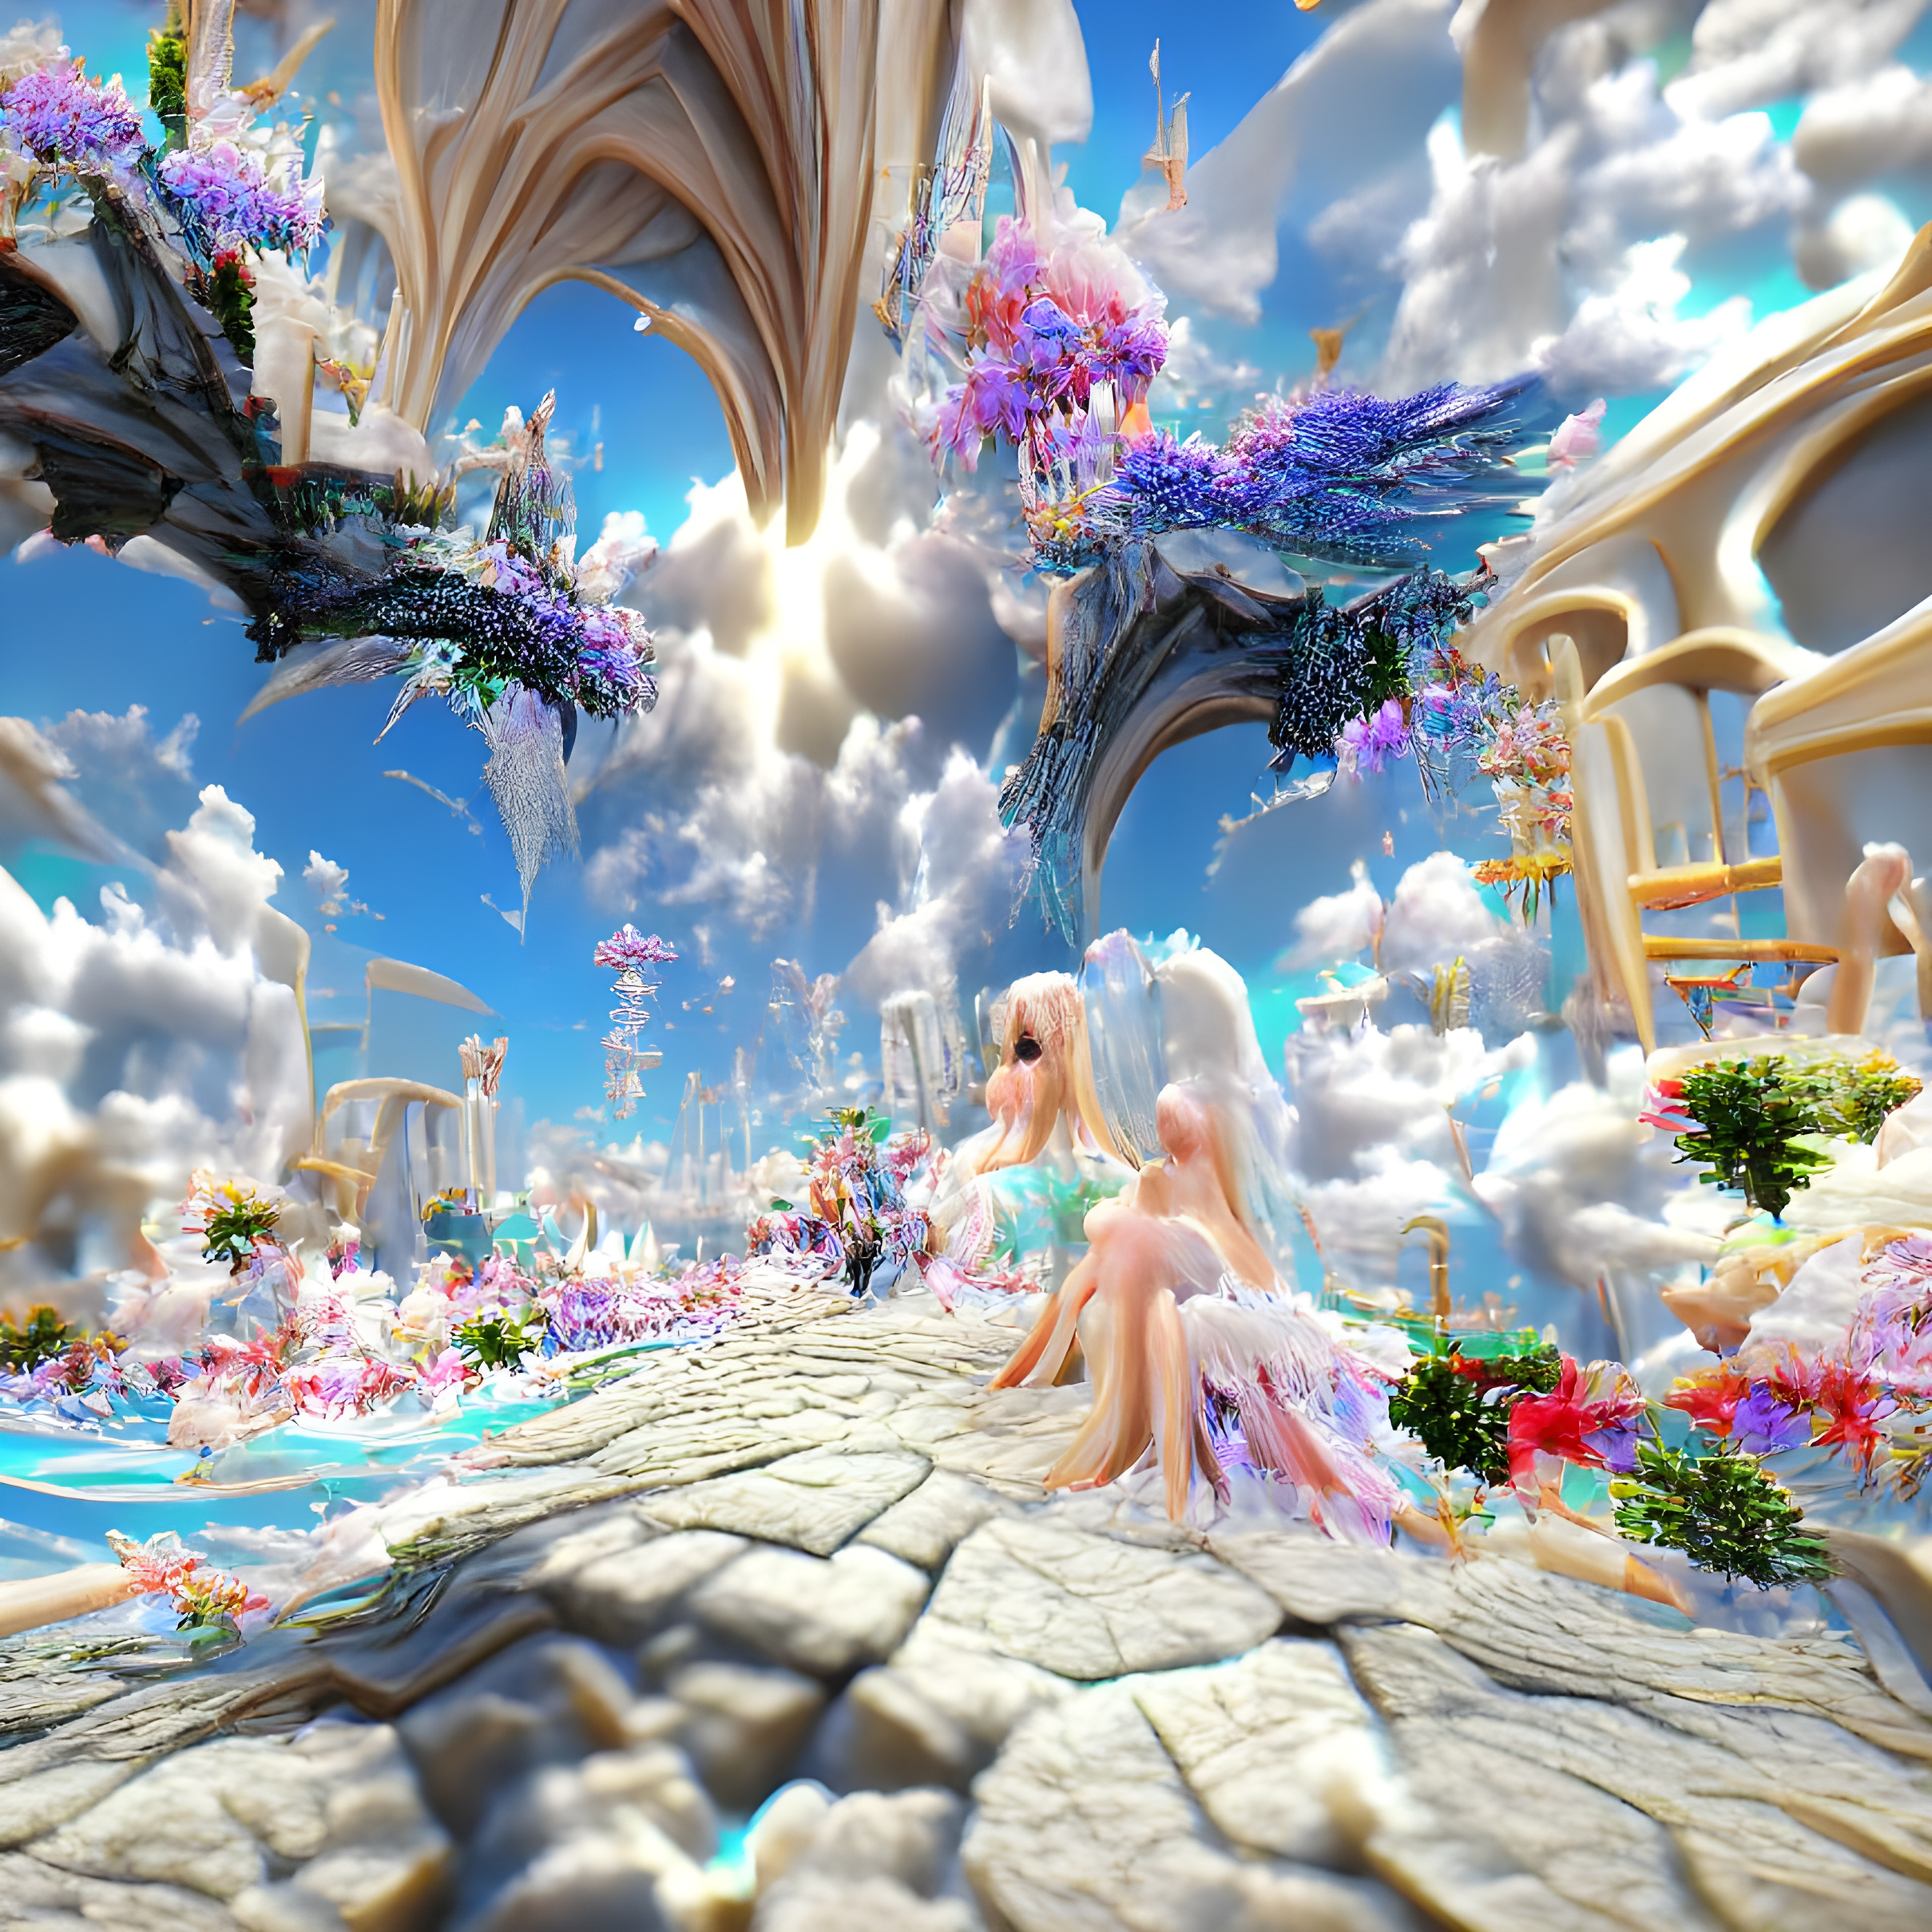 Heavenly Visions #1